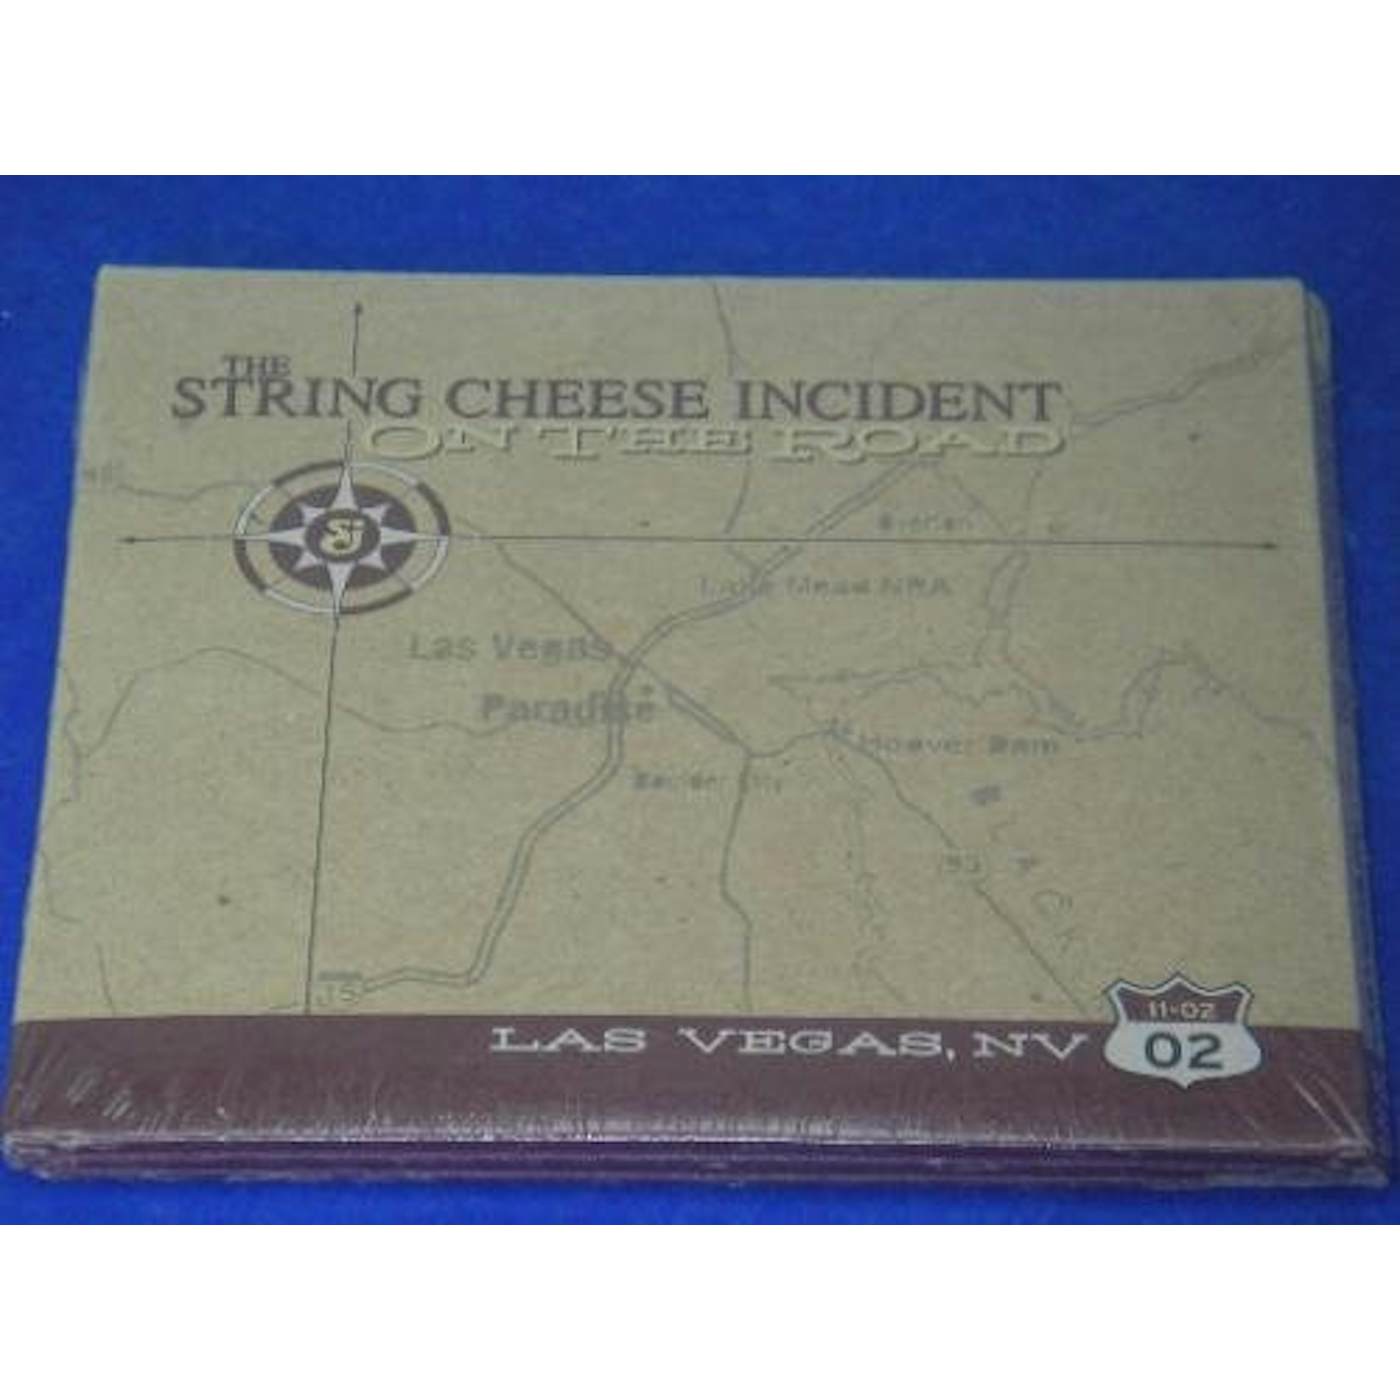 The String Cheese Incident NOVEMBER 2 2002 LAS VEGAS NV: ON THE ROAD CD